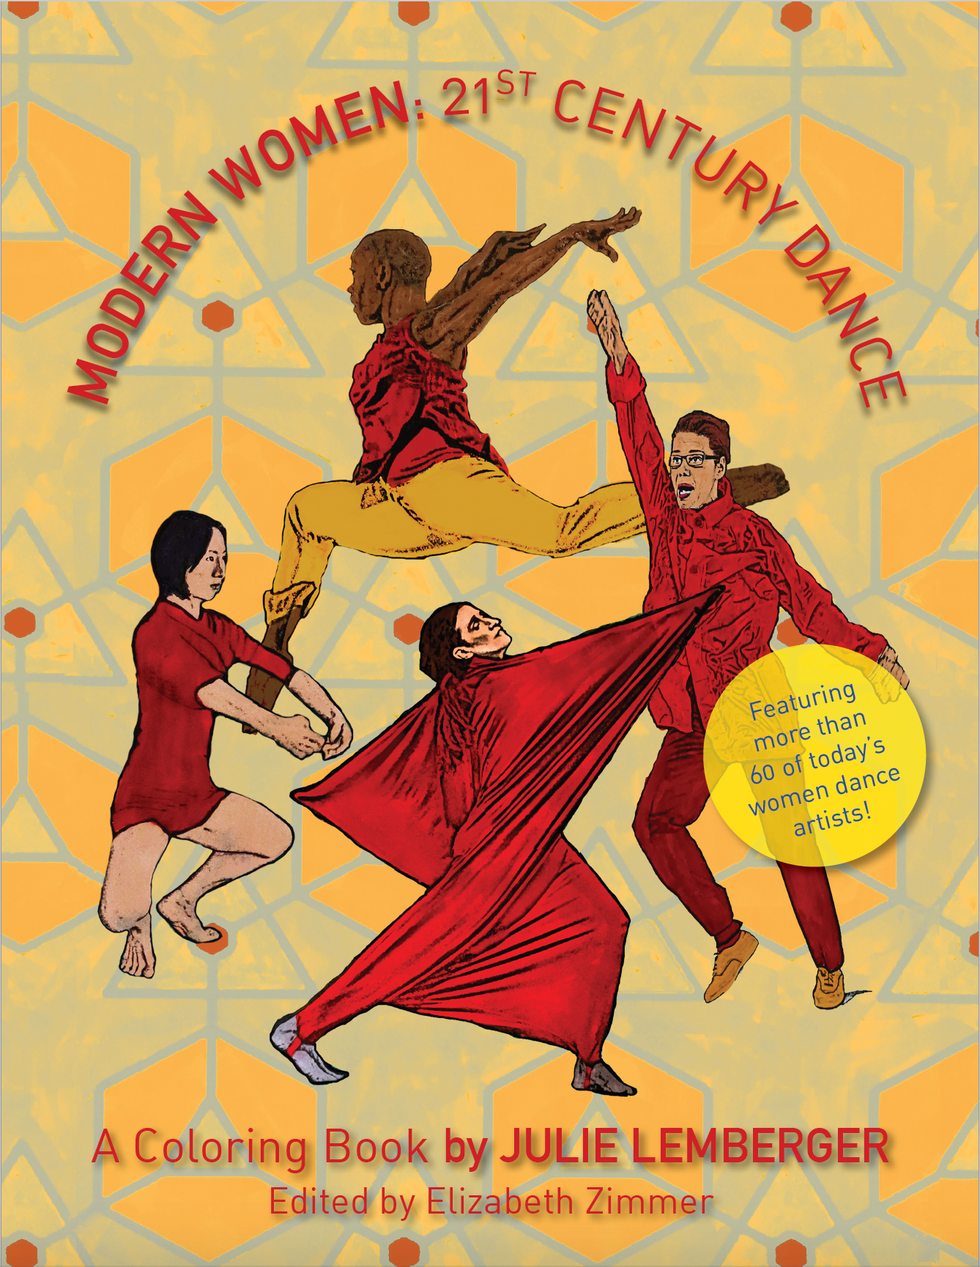 Cover of the coloring book, in yellow, orange and red tones, showing four dancer line drawings on a graphic background.